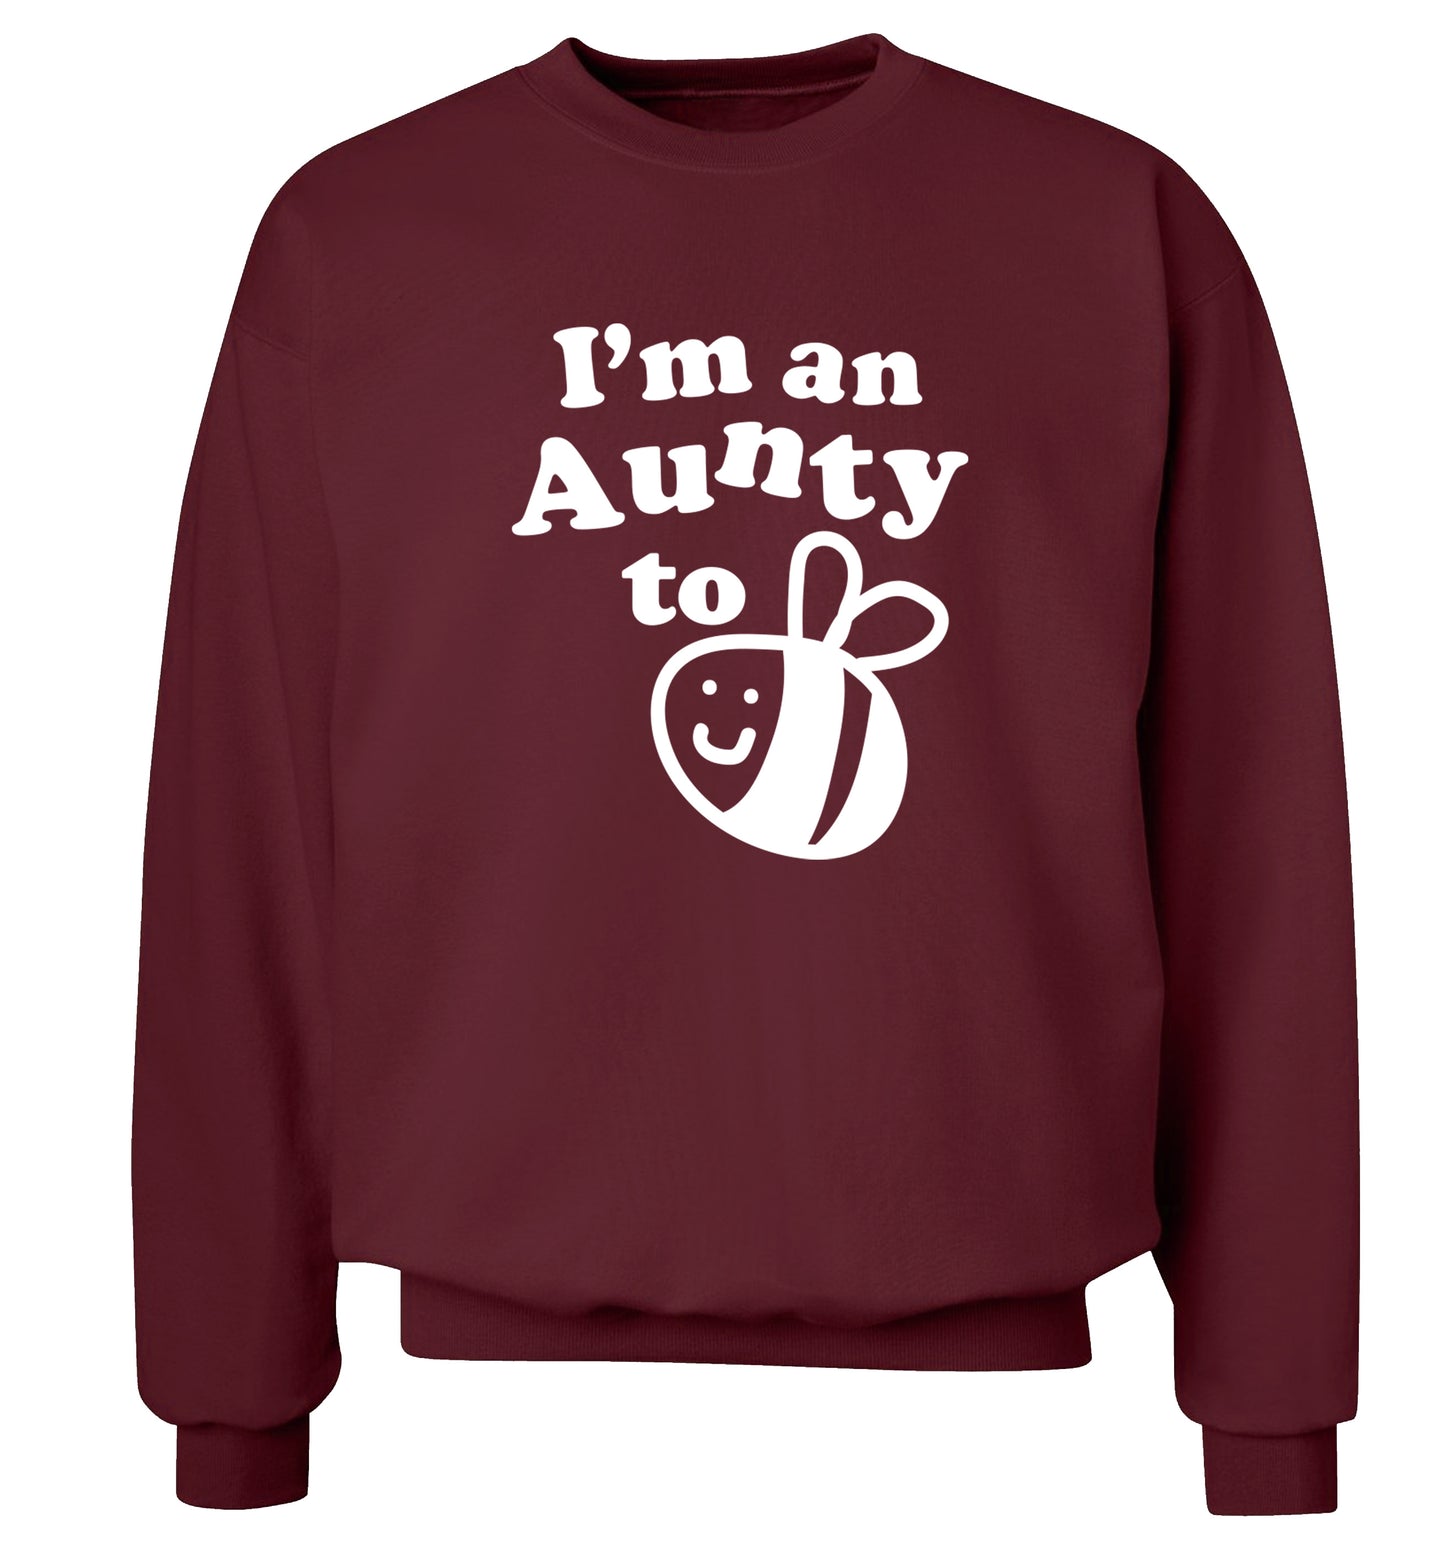 I'm an aunty to be Adult's unisex maroon Sweater 2XL